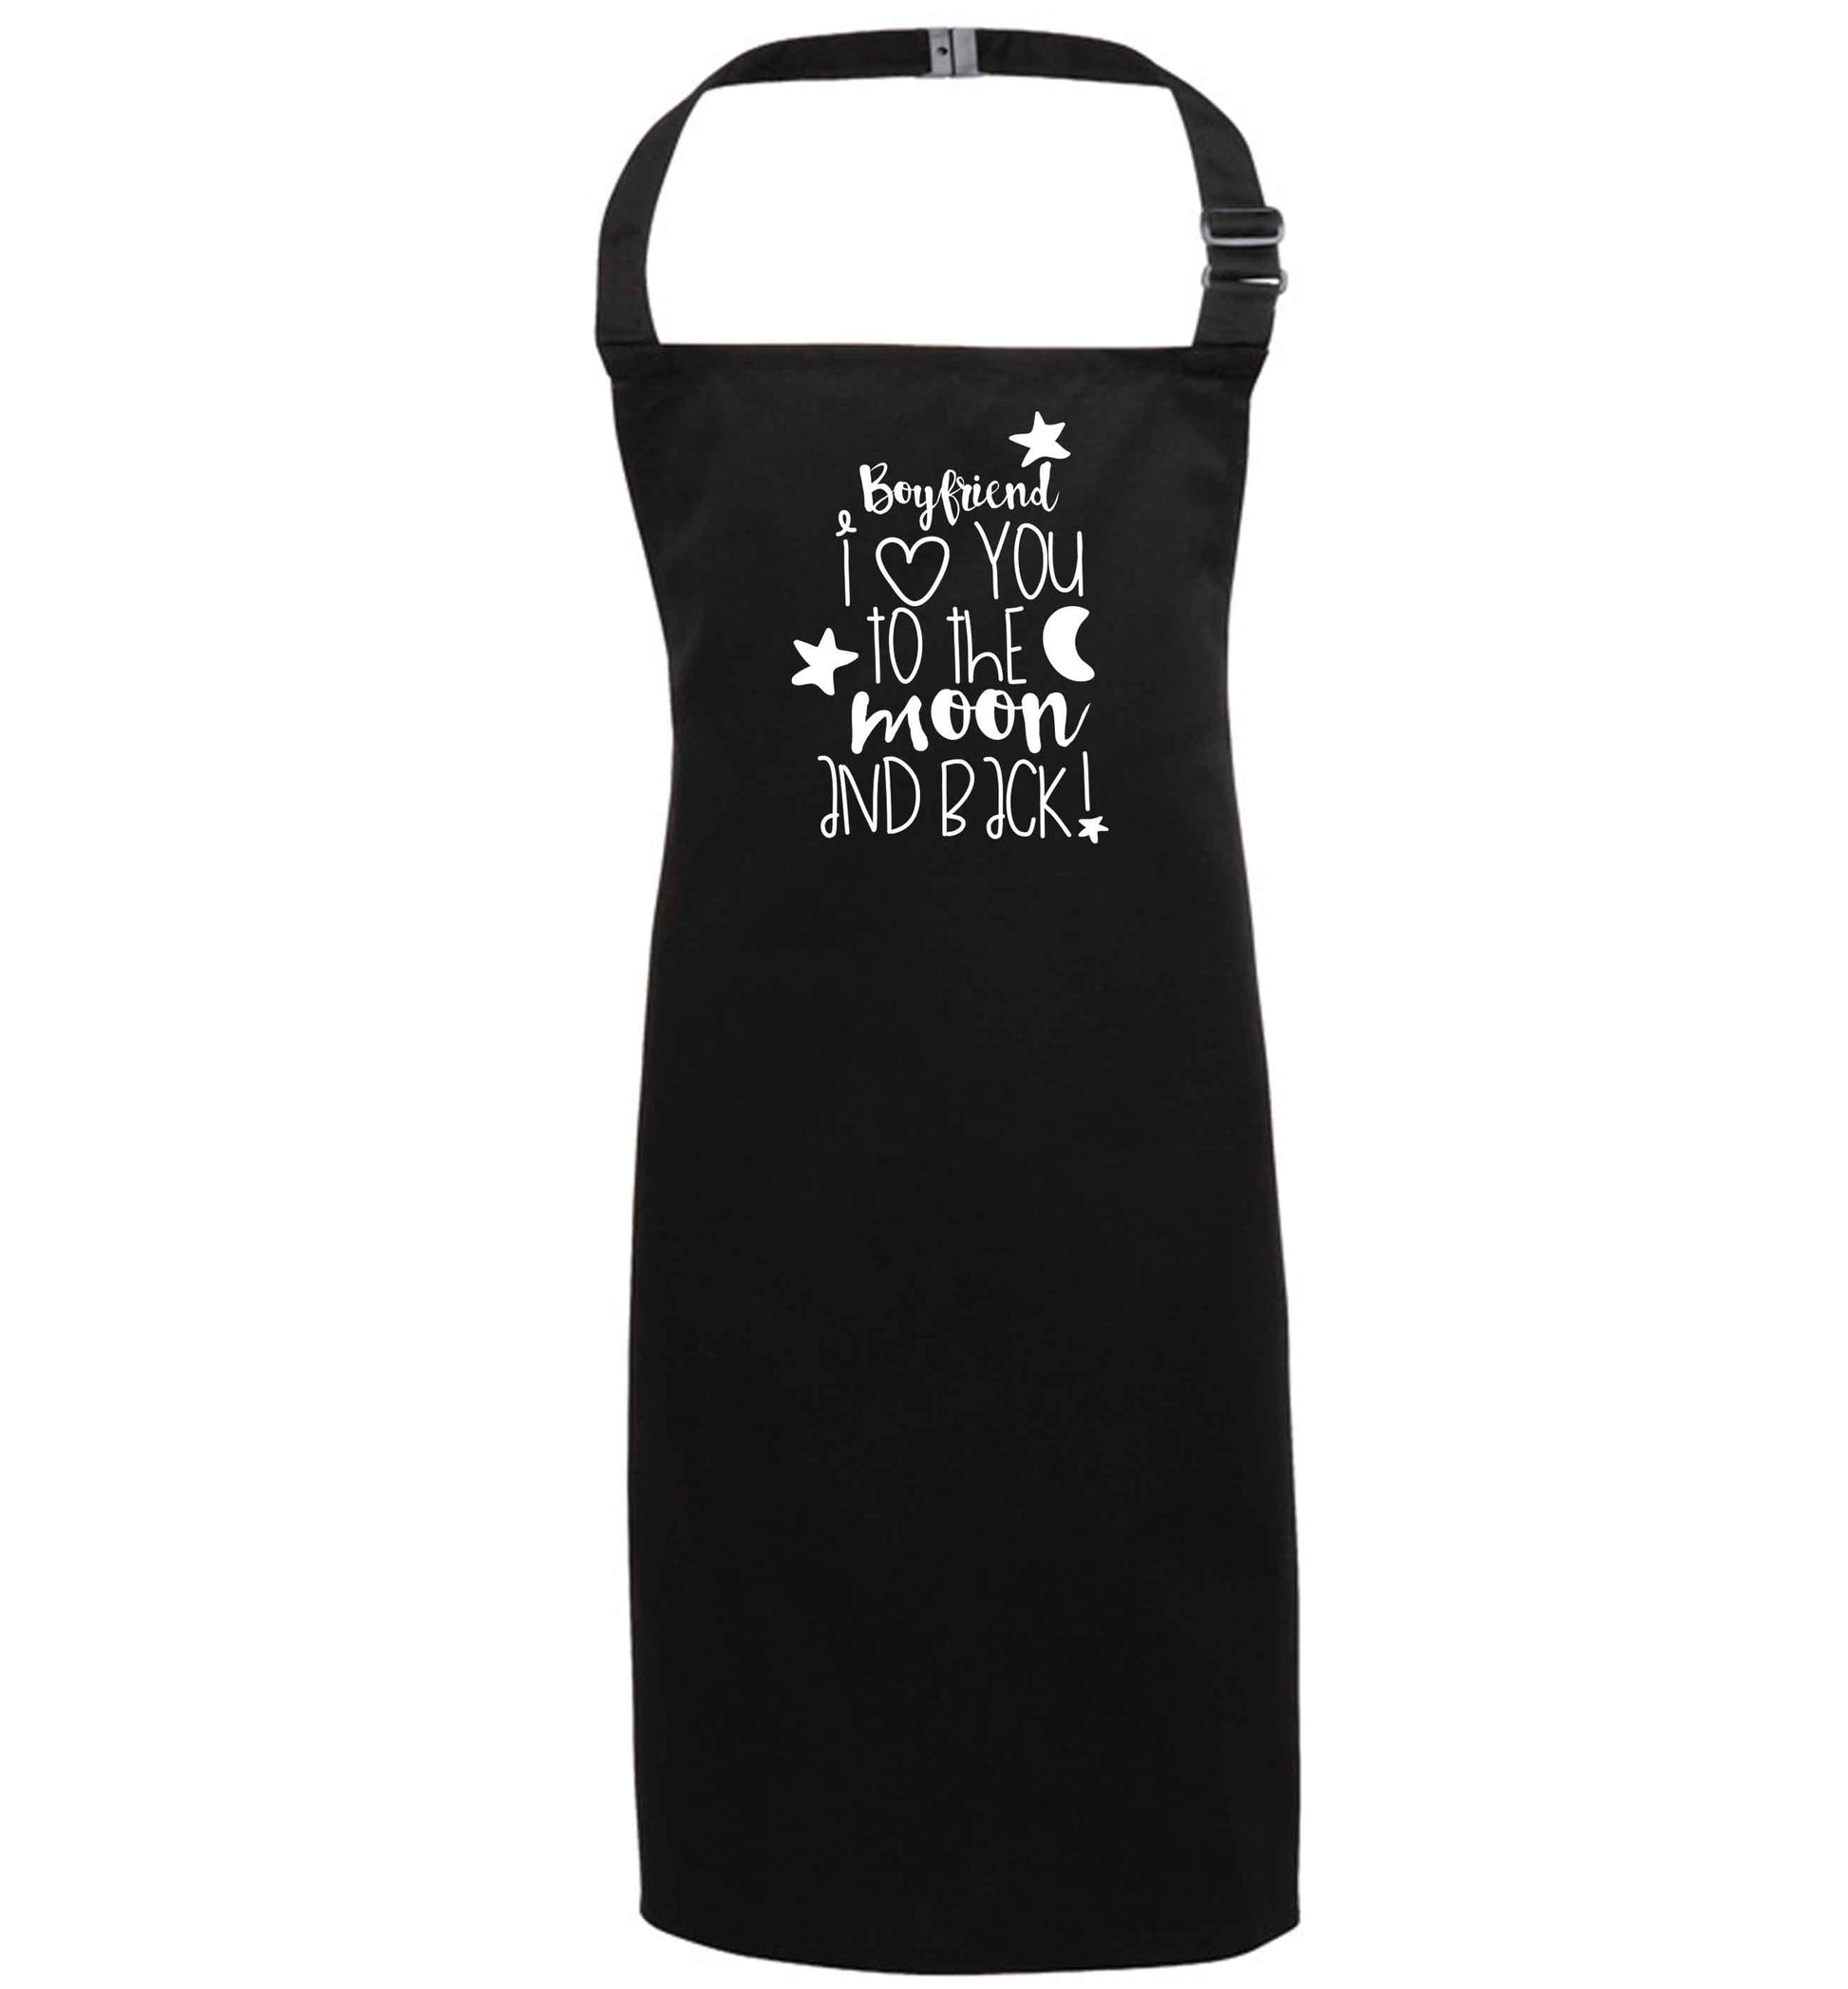 Boyfriend I love you to the moon and back black apron 7-10 years